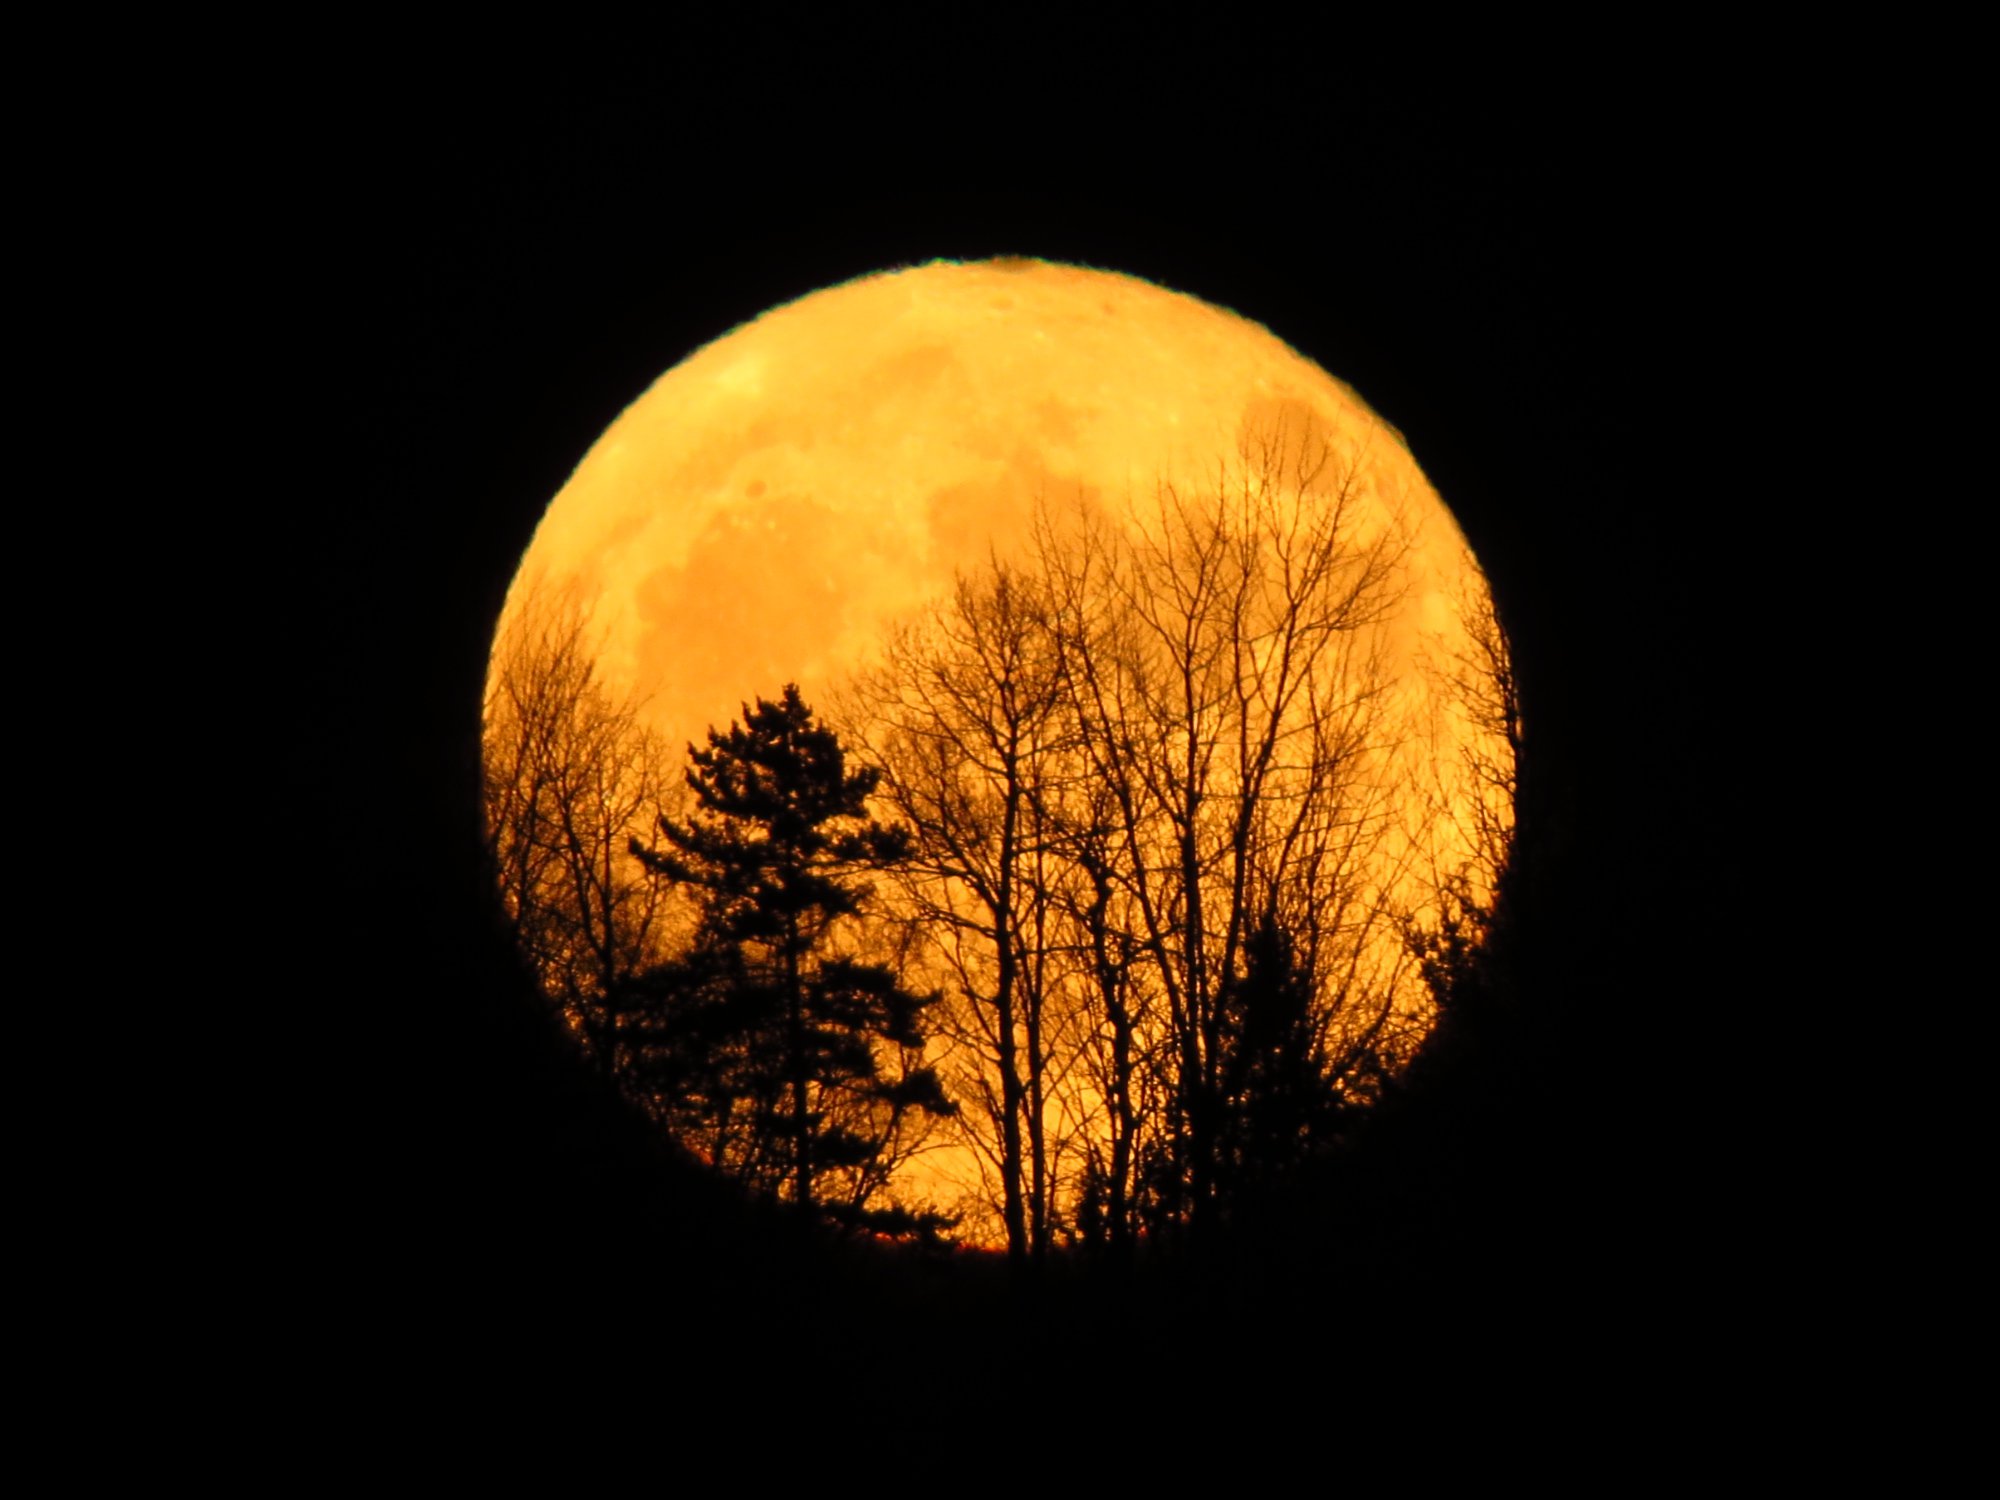 PICTURES: View & submit your shots of the November 2016 supermoon ...